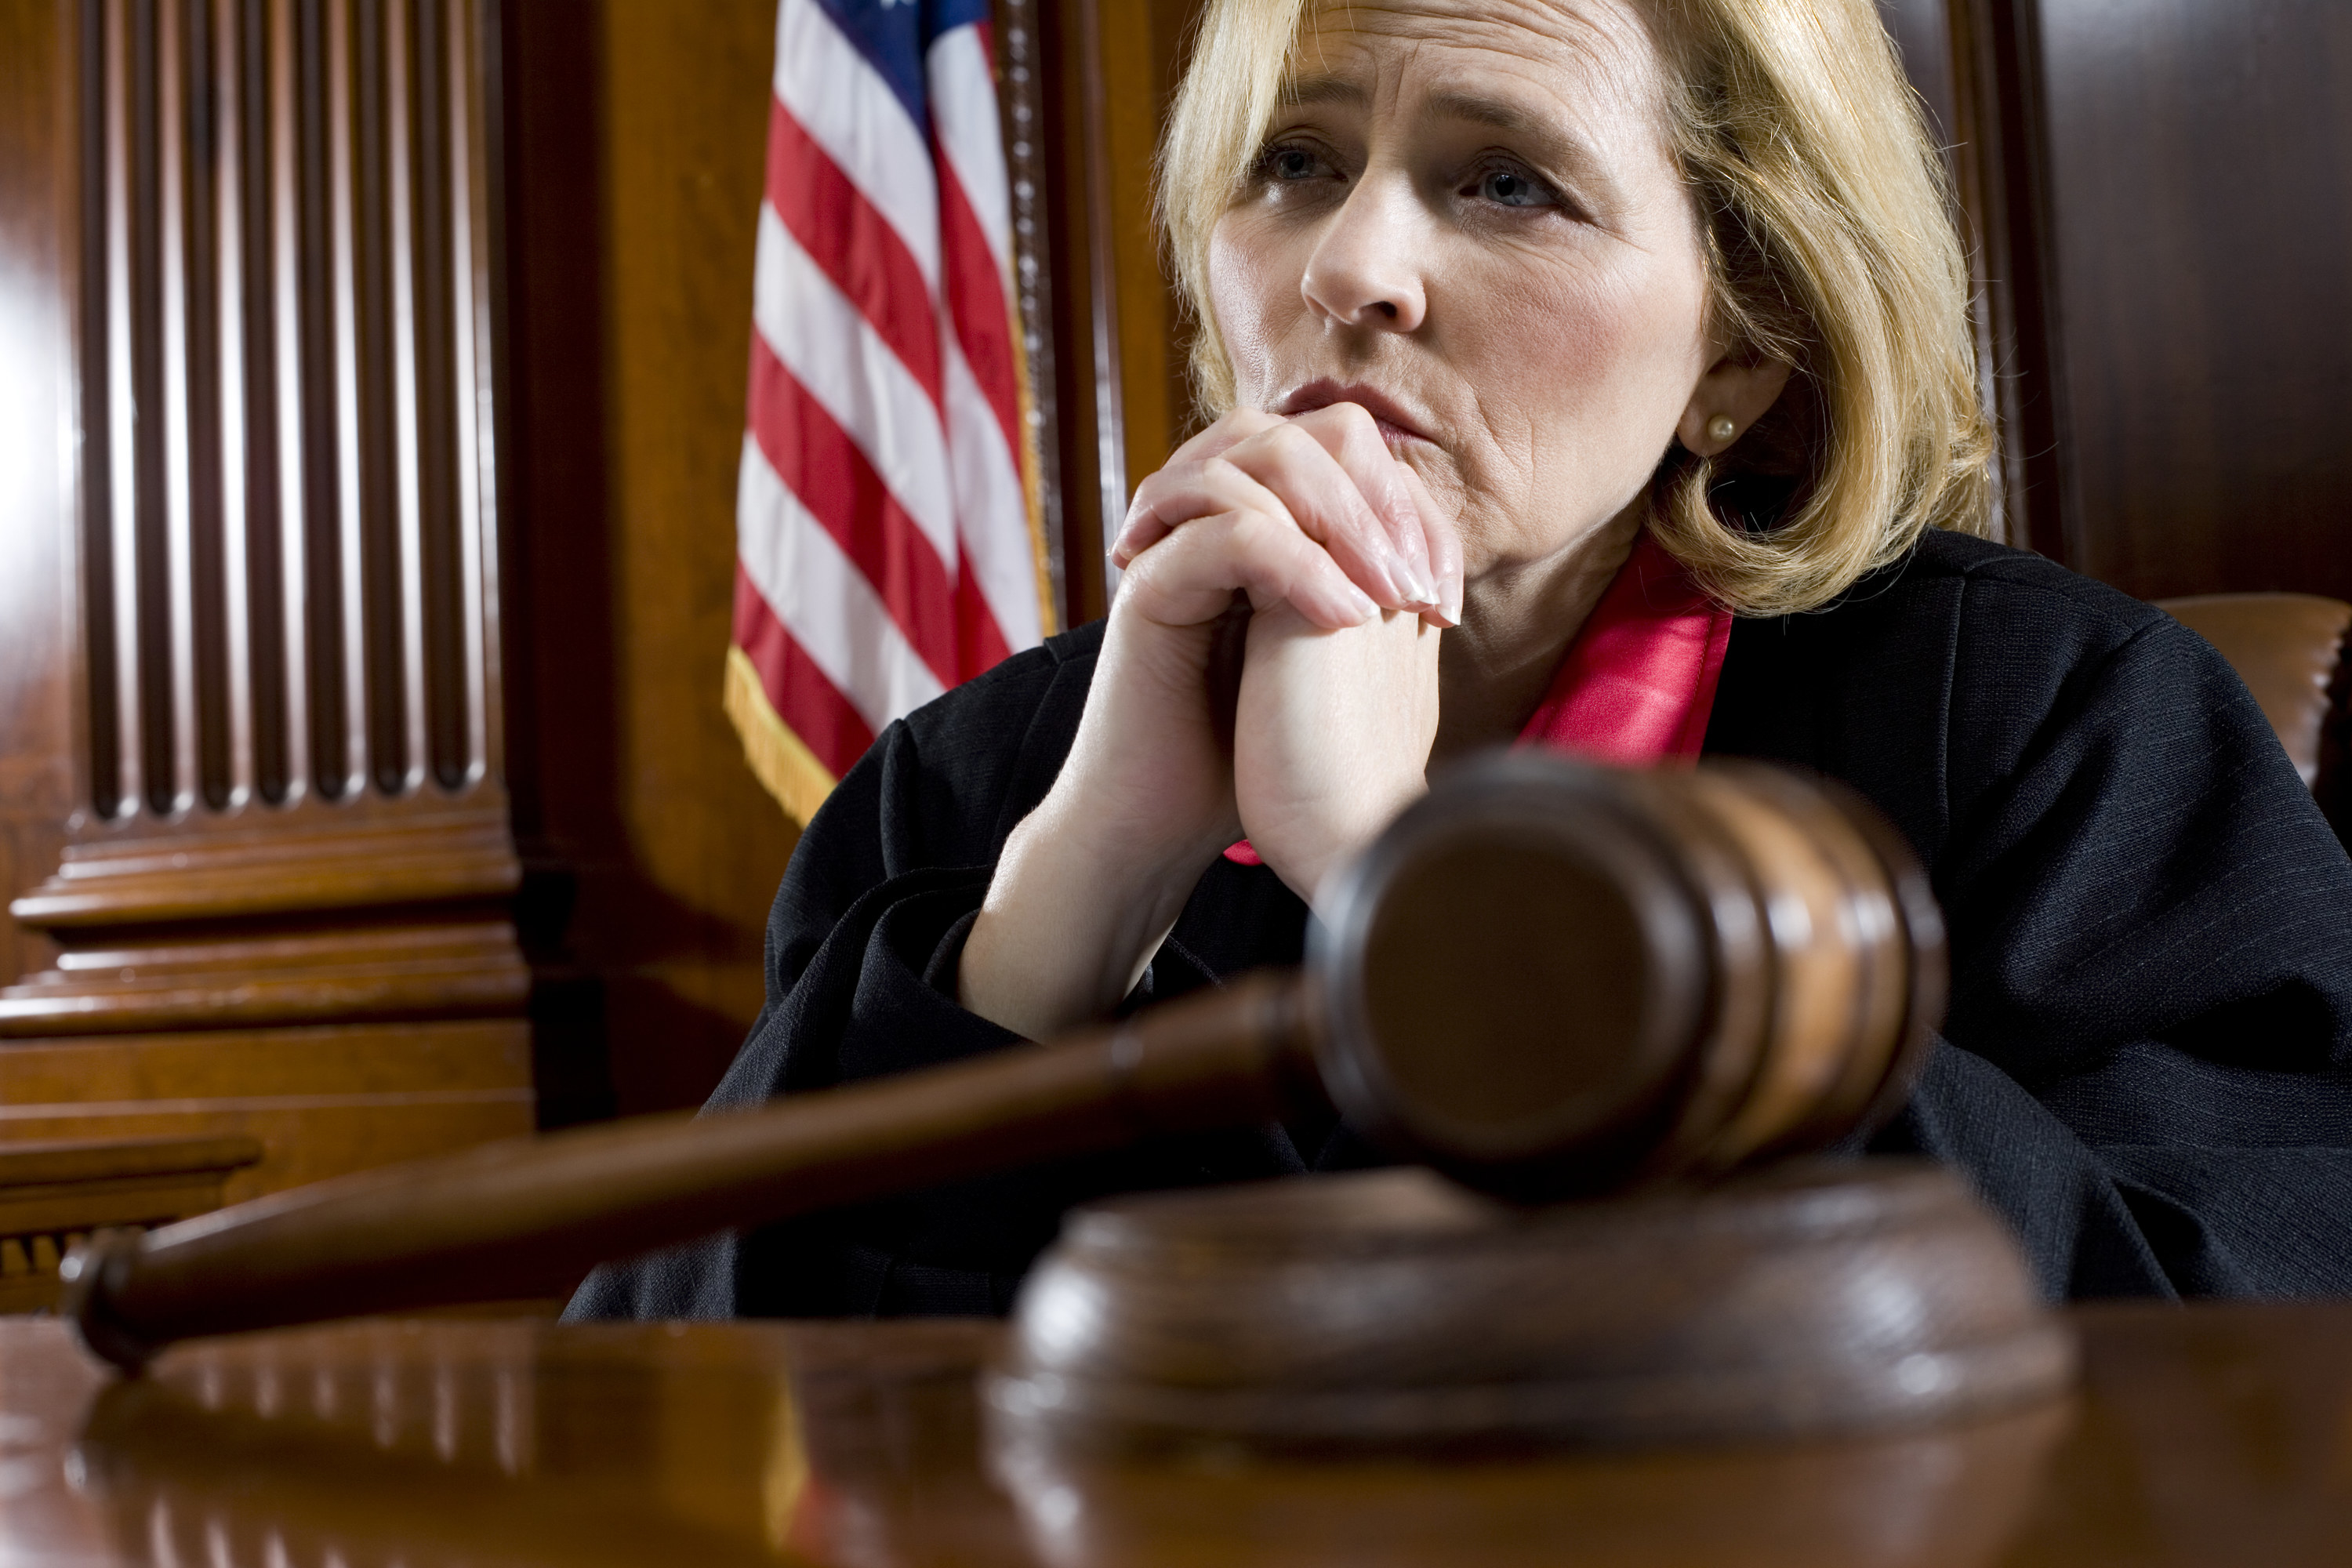 A female judge sits by her gavel and listens to people in a court room